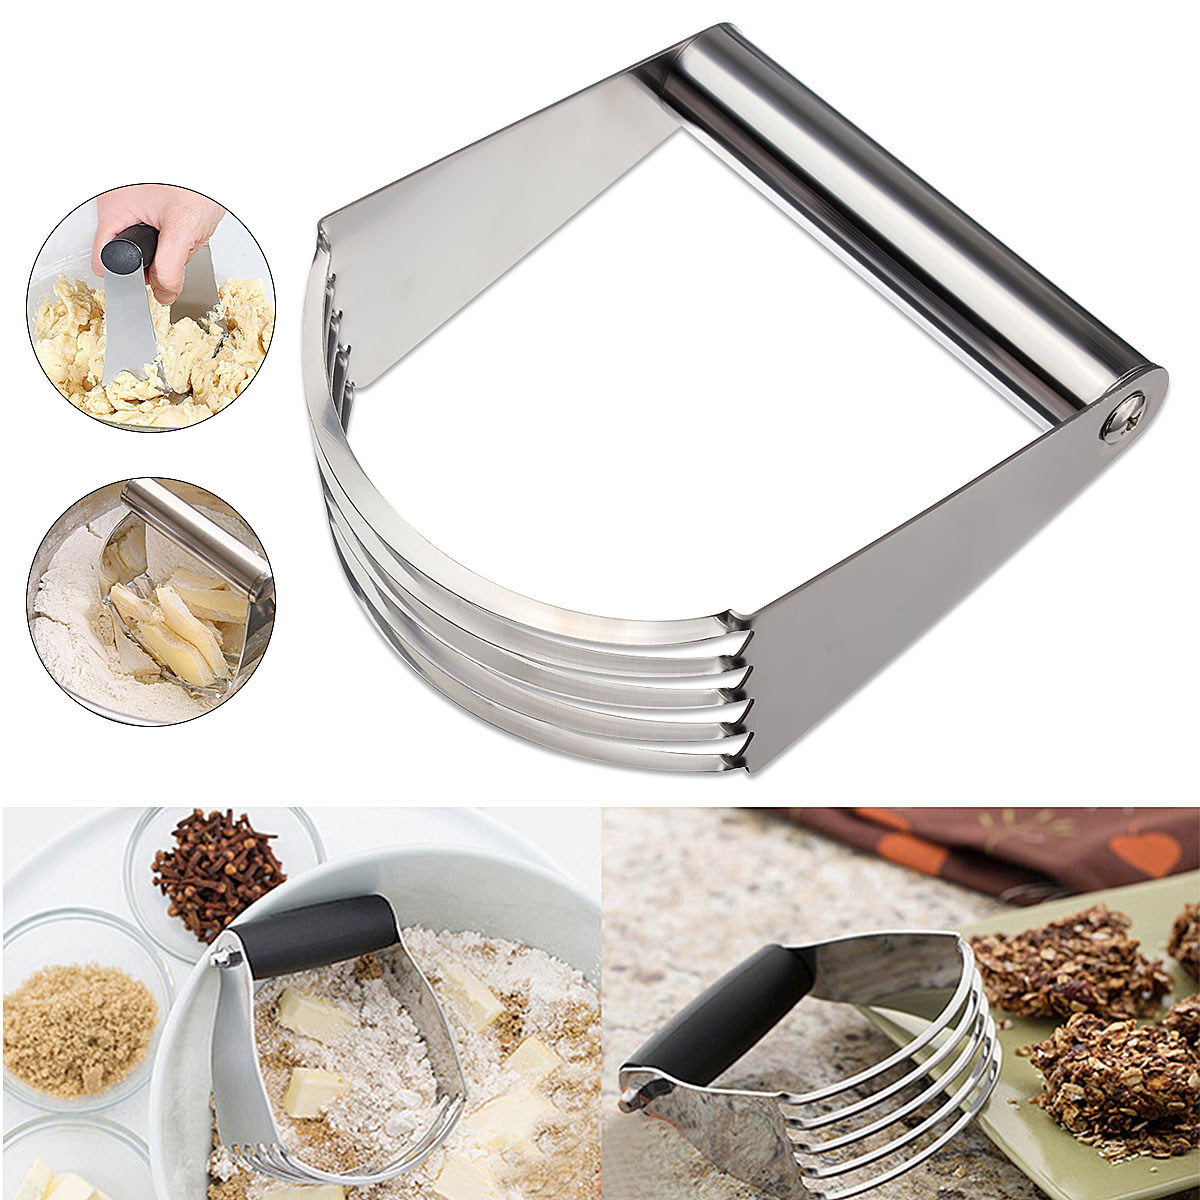 Stainless-Steel-Dough-Pastry-Blender-Baking-Cutter-5-Blade-Mixer-Bread-Kitchen-Tool-Silver-947782